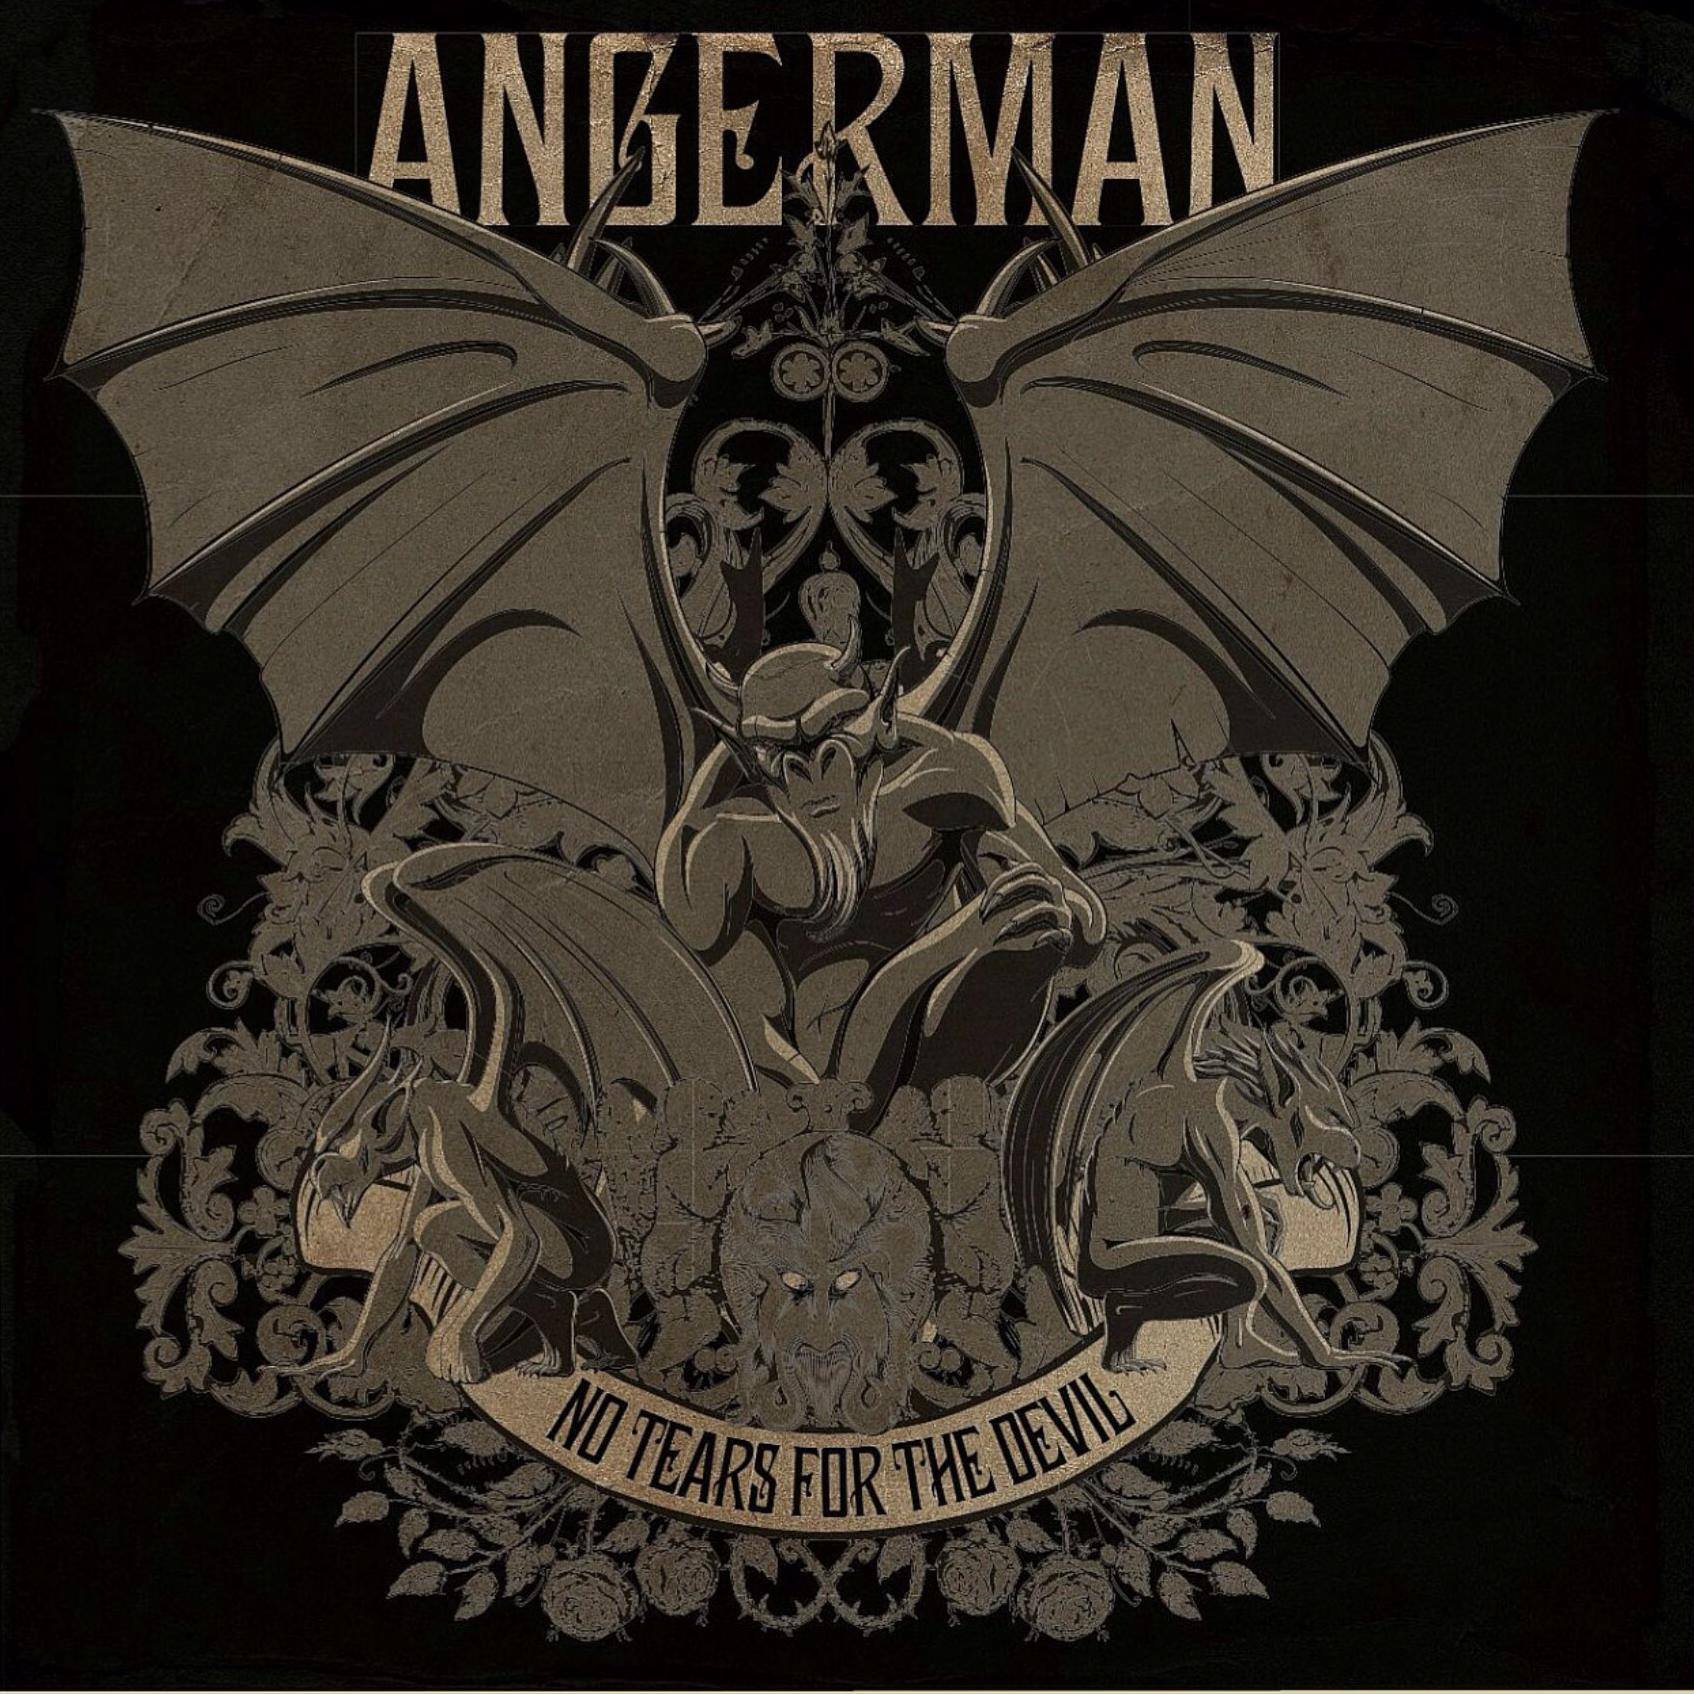 Angerman – No Tears For The Devil